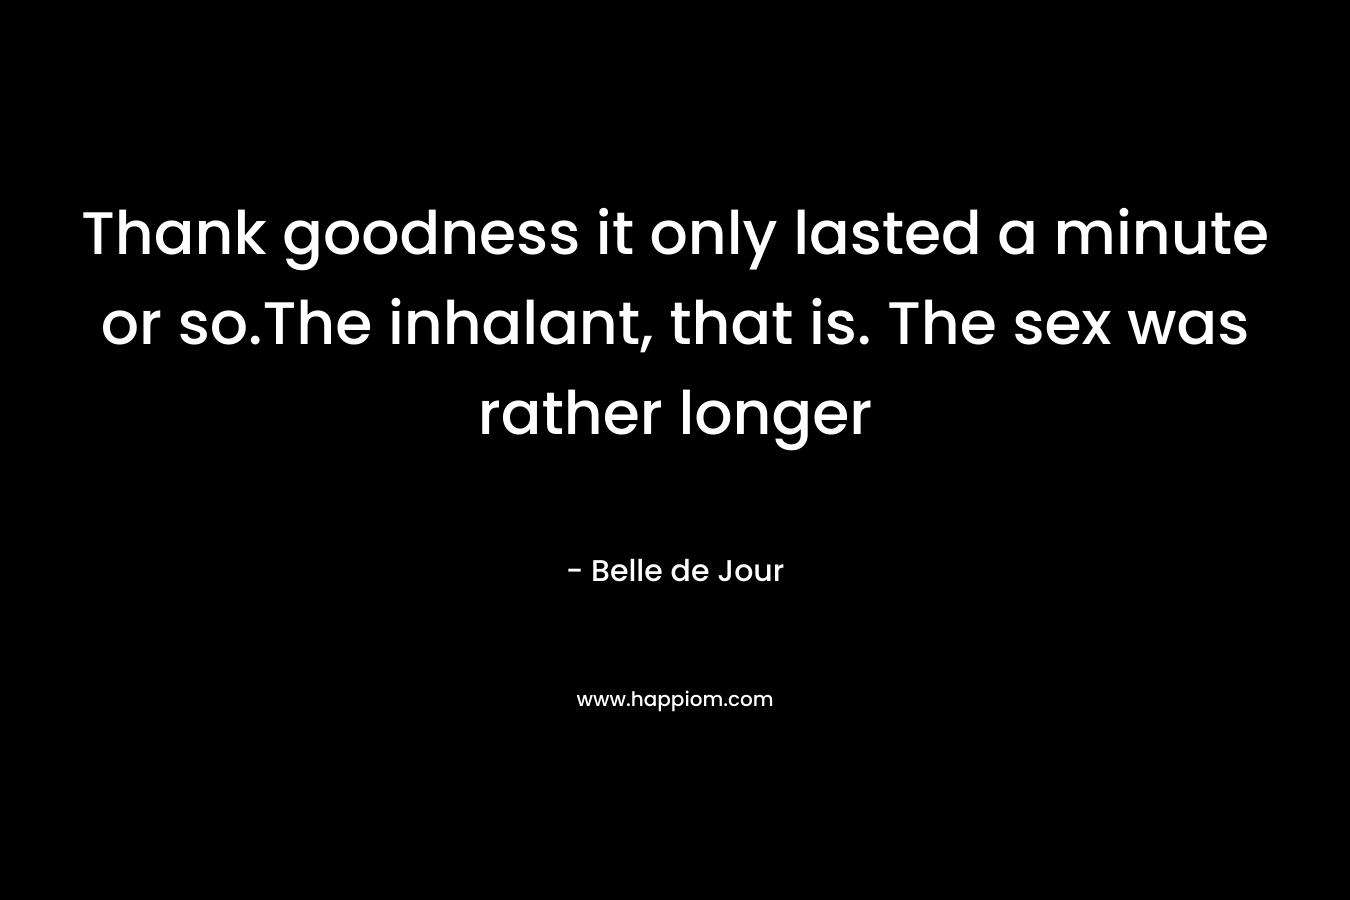 Thank goodness it only lasted a minute or so.The inhalant, that is. The sex was rather longer – Belle de Jour